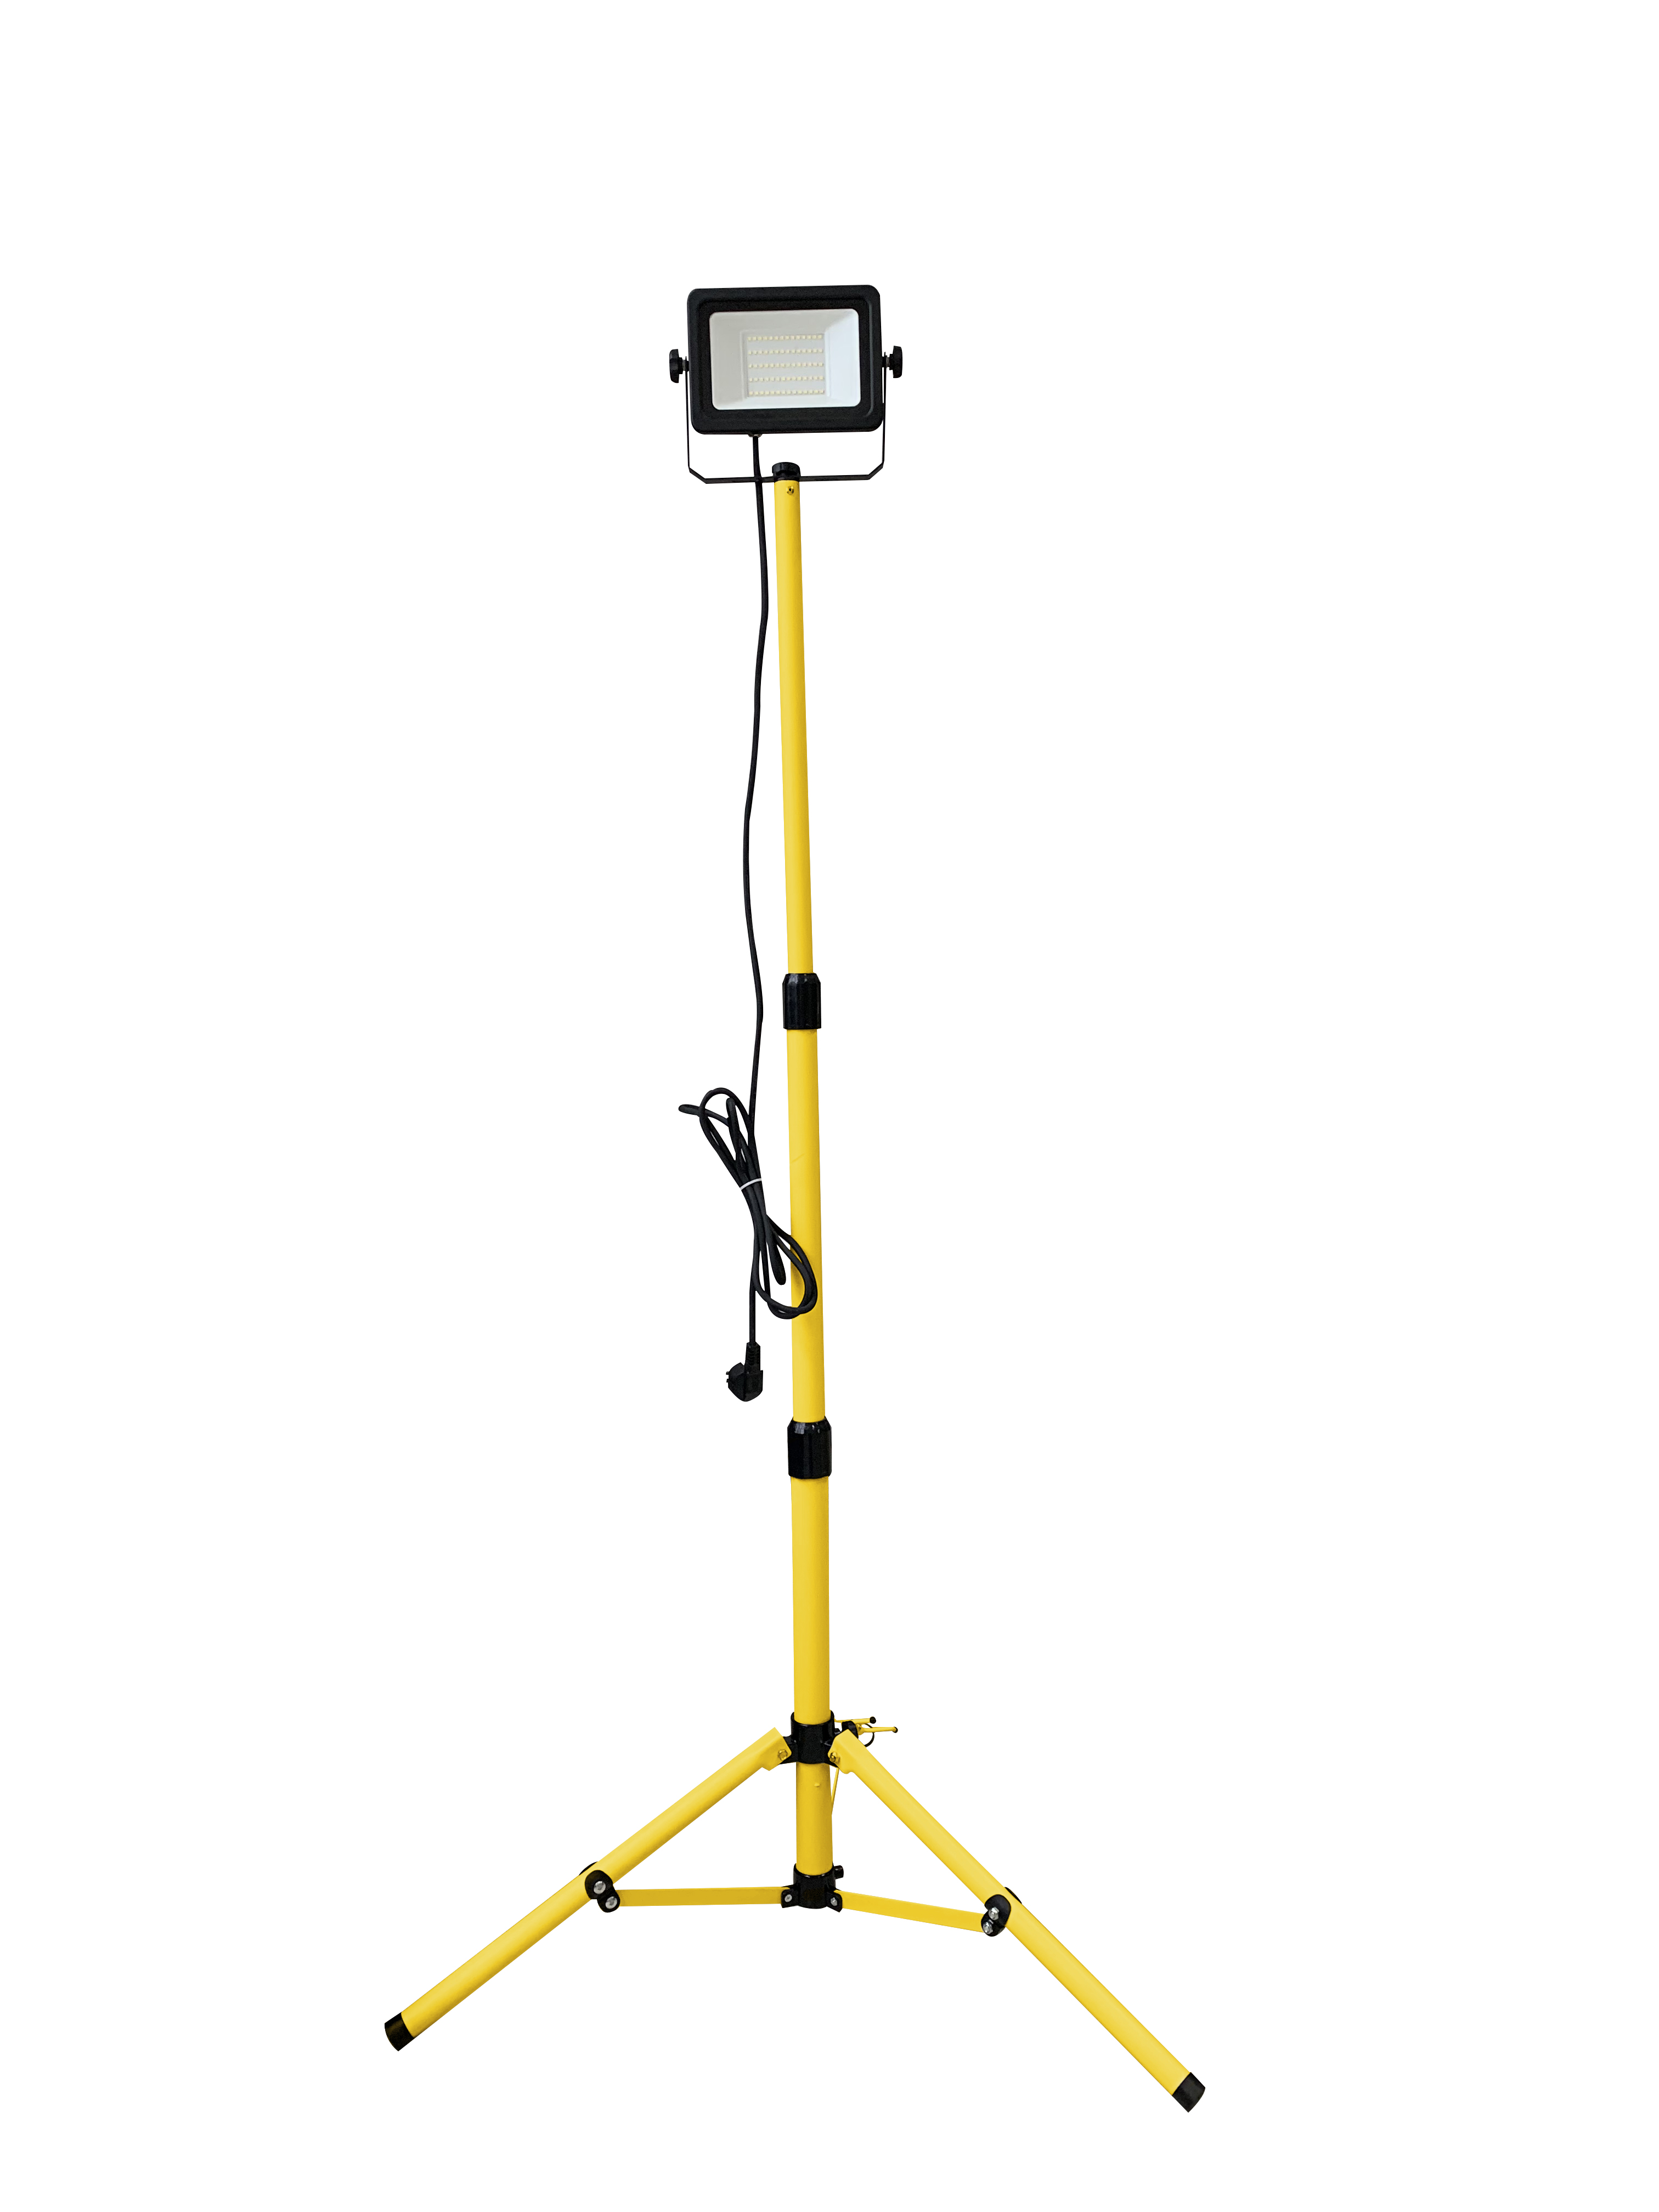 50w high quality outdoor led flood light Featured Image